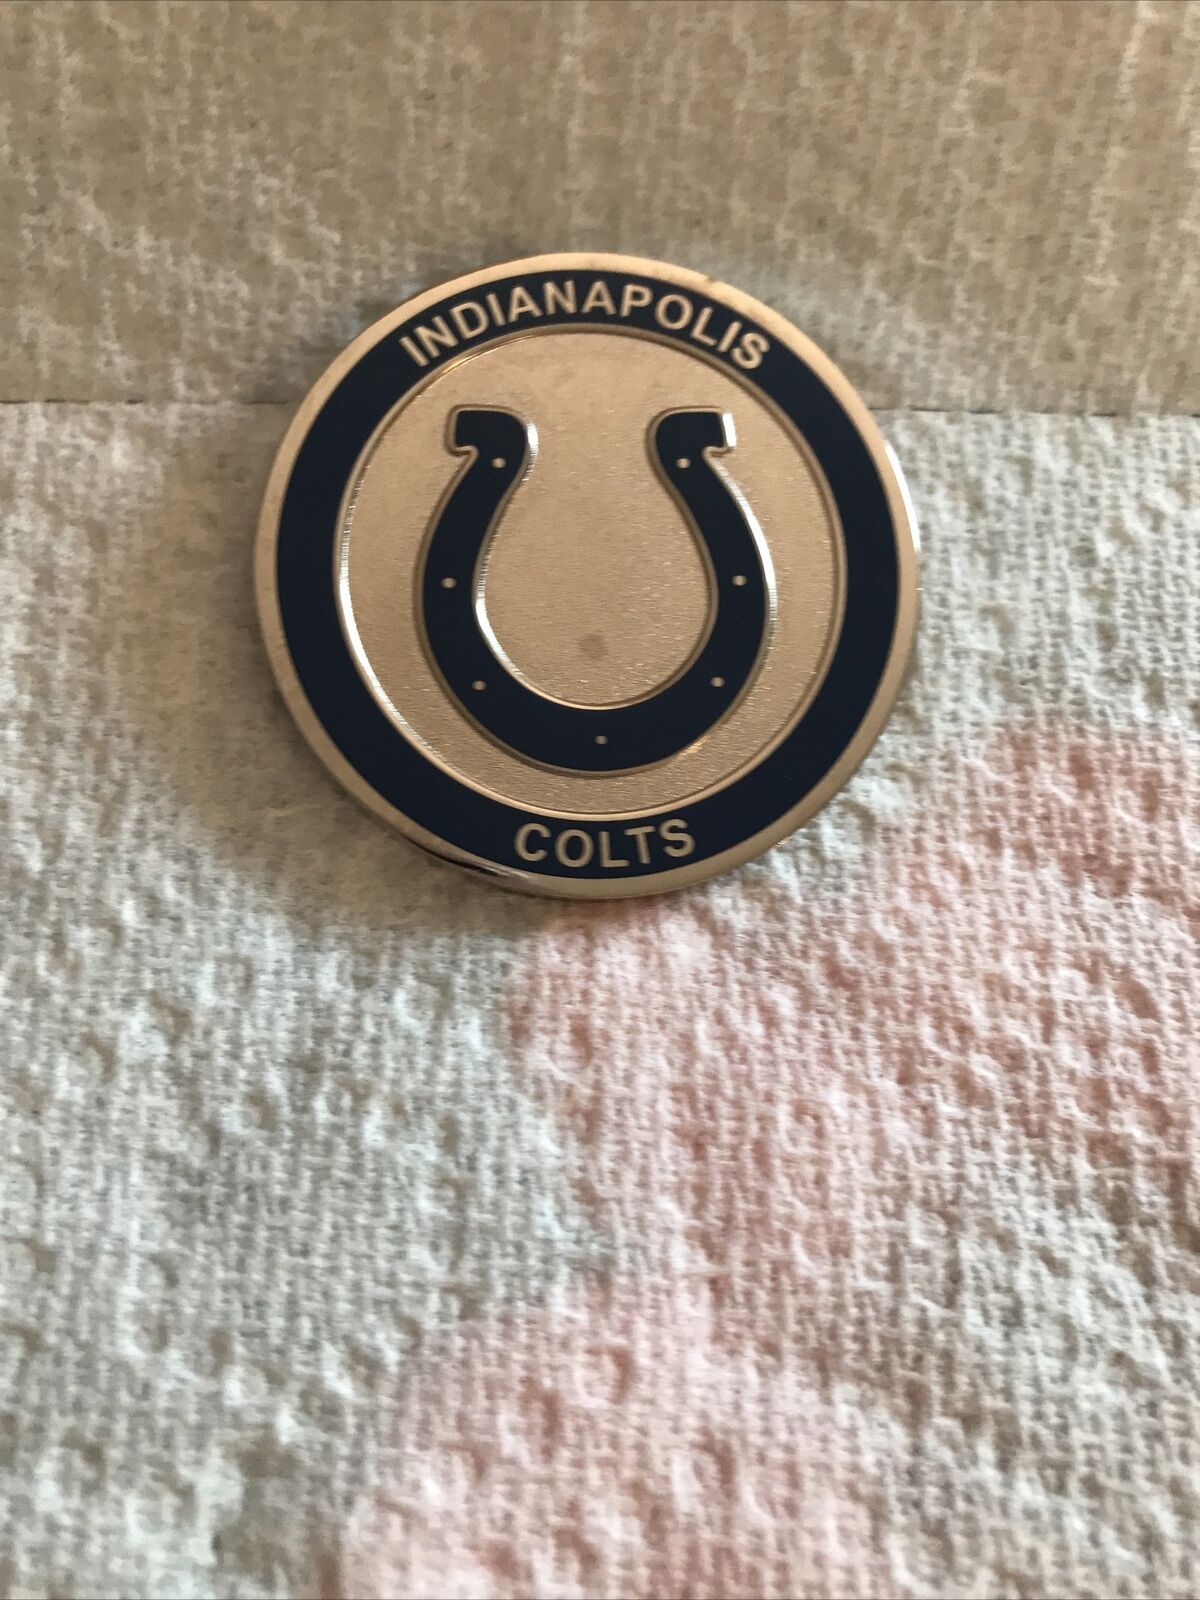 Indianapolis Colts Fire Police Emt & HLS  Honor Challenge Coin